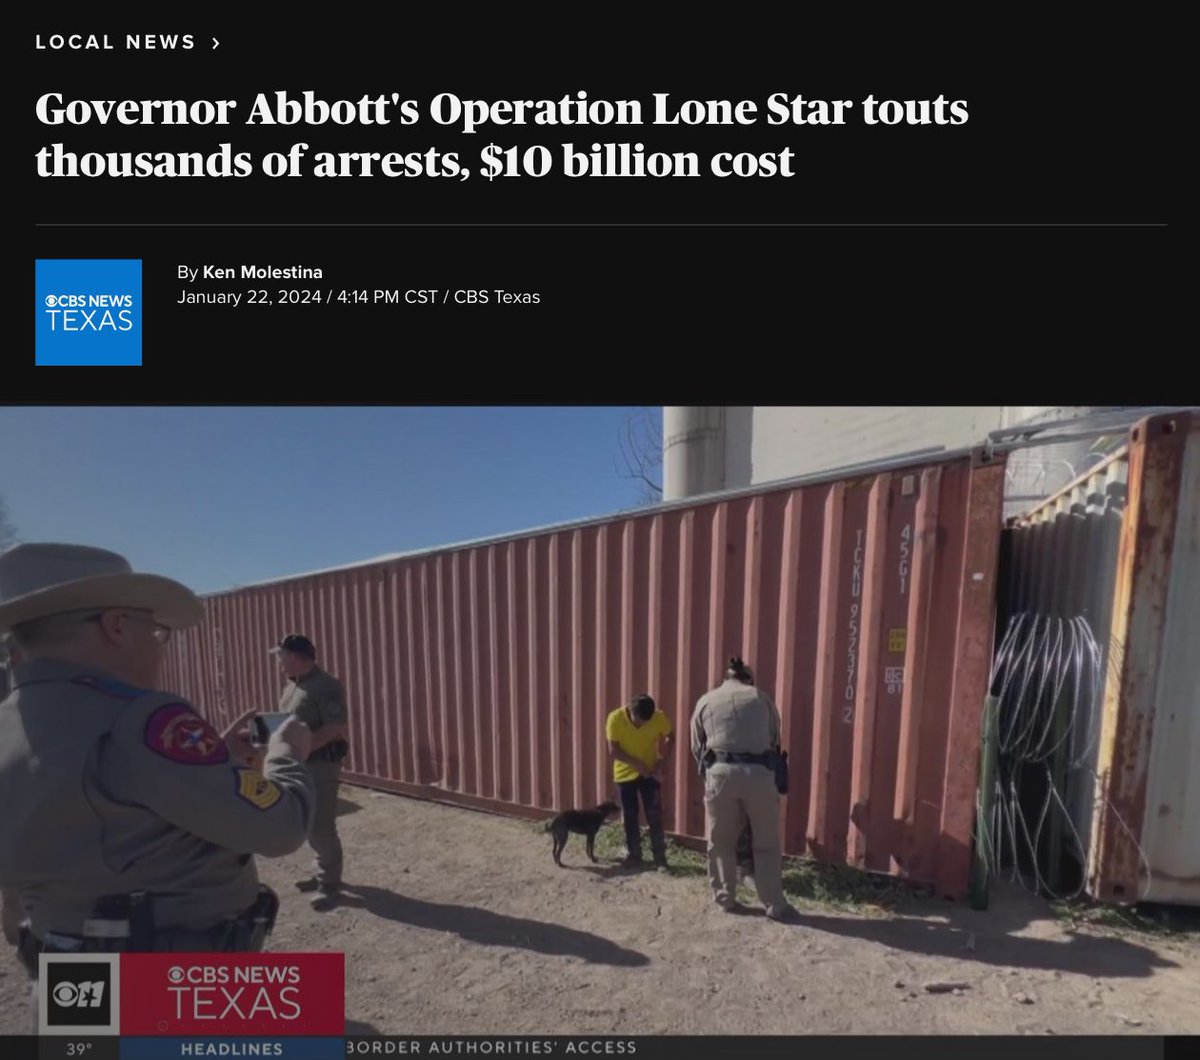 @vznative @demosthenes_lok @Michael_Yon Other Texans have been demanding the enforcement of Article IV Sec 4 since 2021. Abbott has yet to take any meaningful action to actually secure the border, despite spending $10B on Operation Lone Star. It’s more of a wealth distribution scam than an actual op. #DetainAndDeport